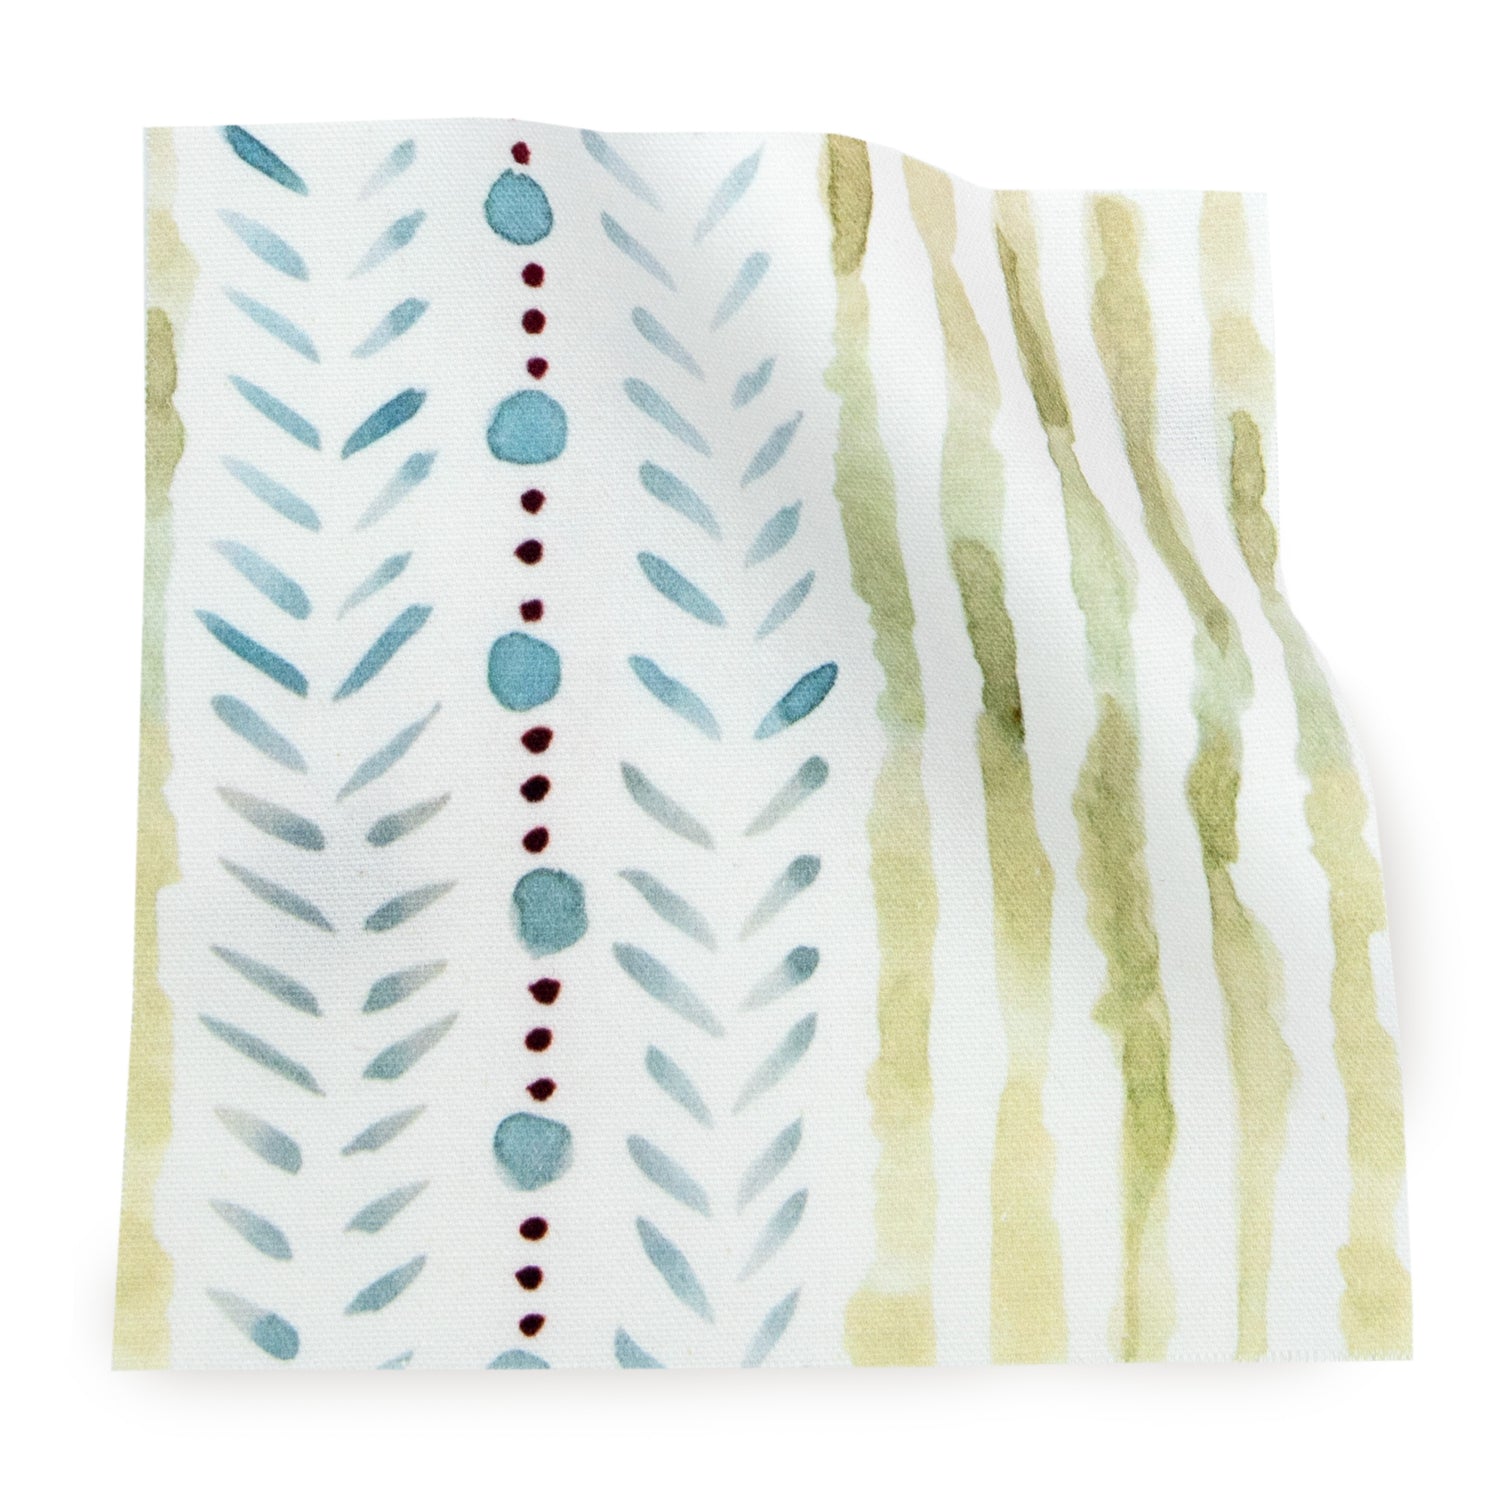 Blue & Green Striped Printed Cotton Swatch